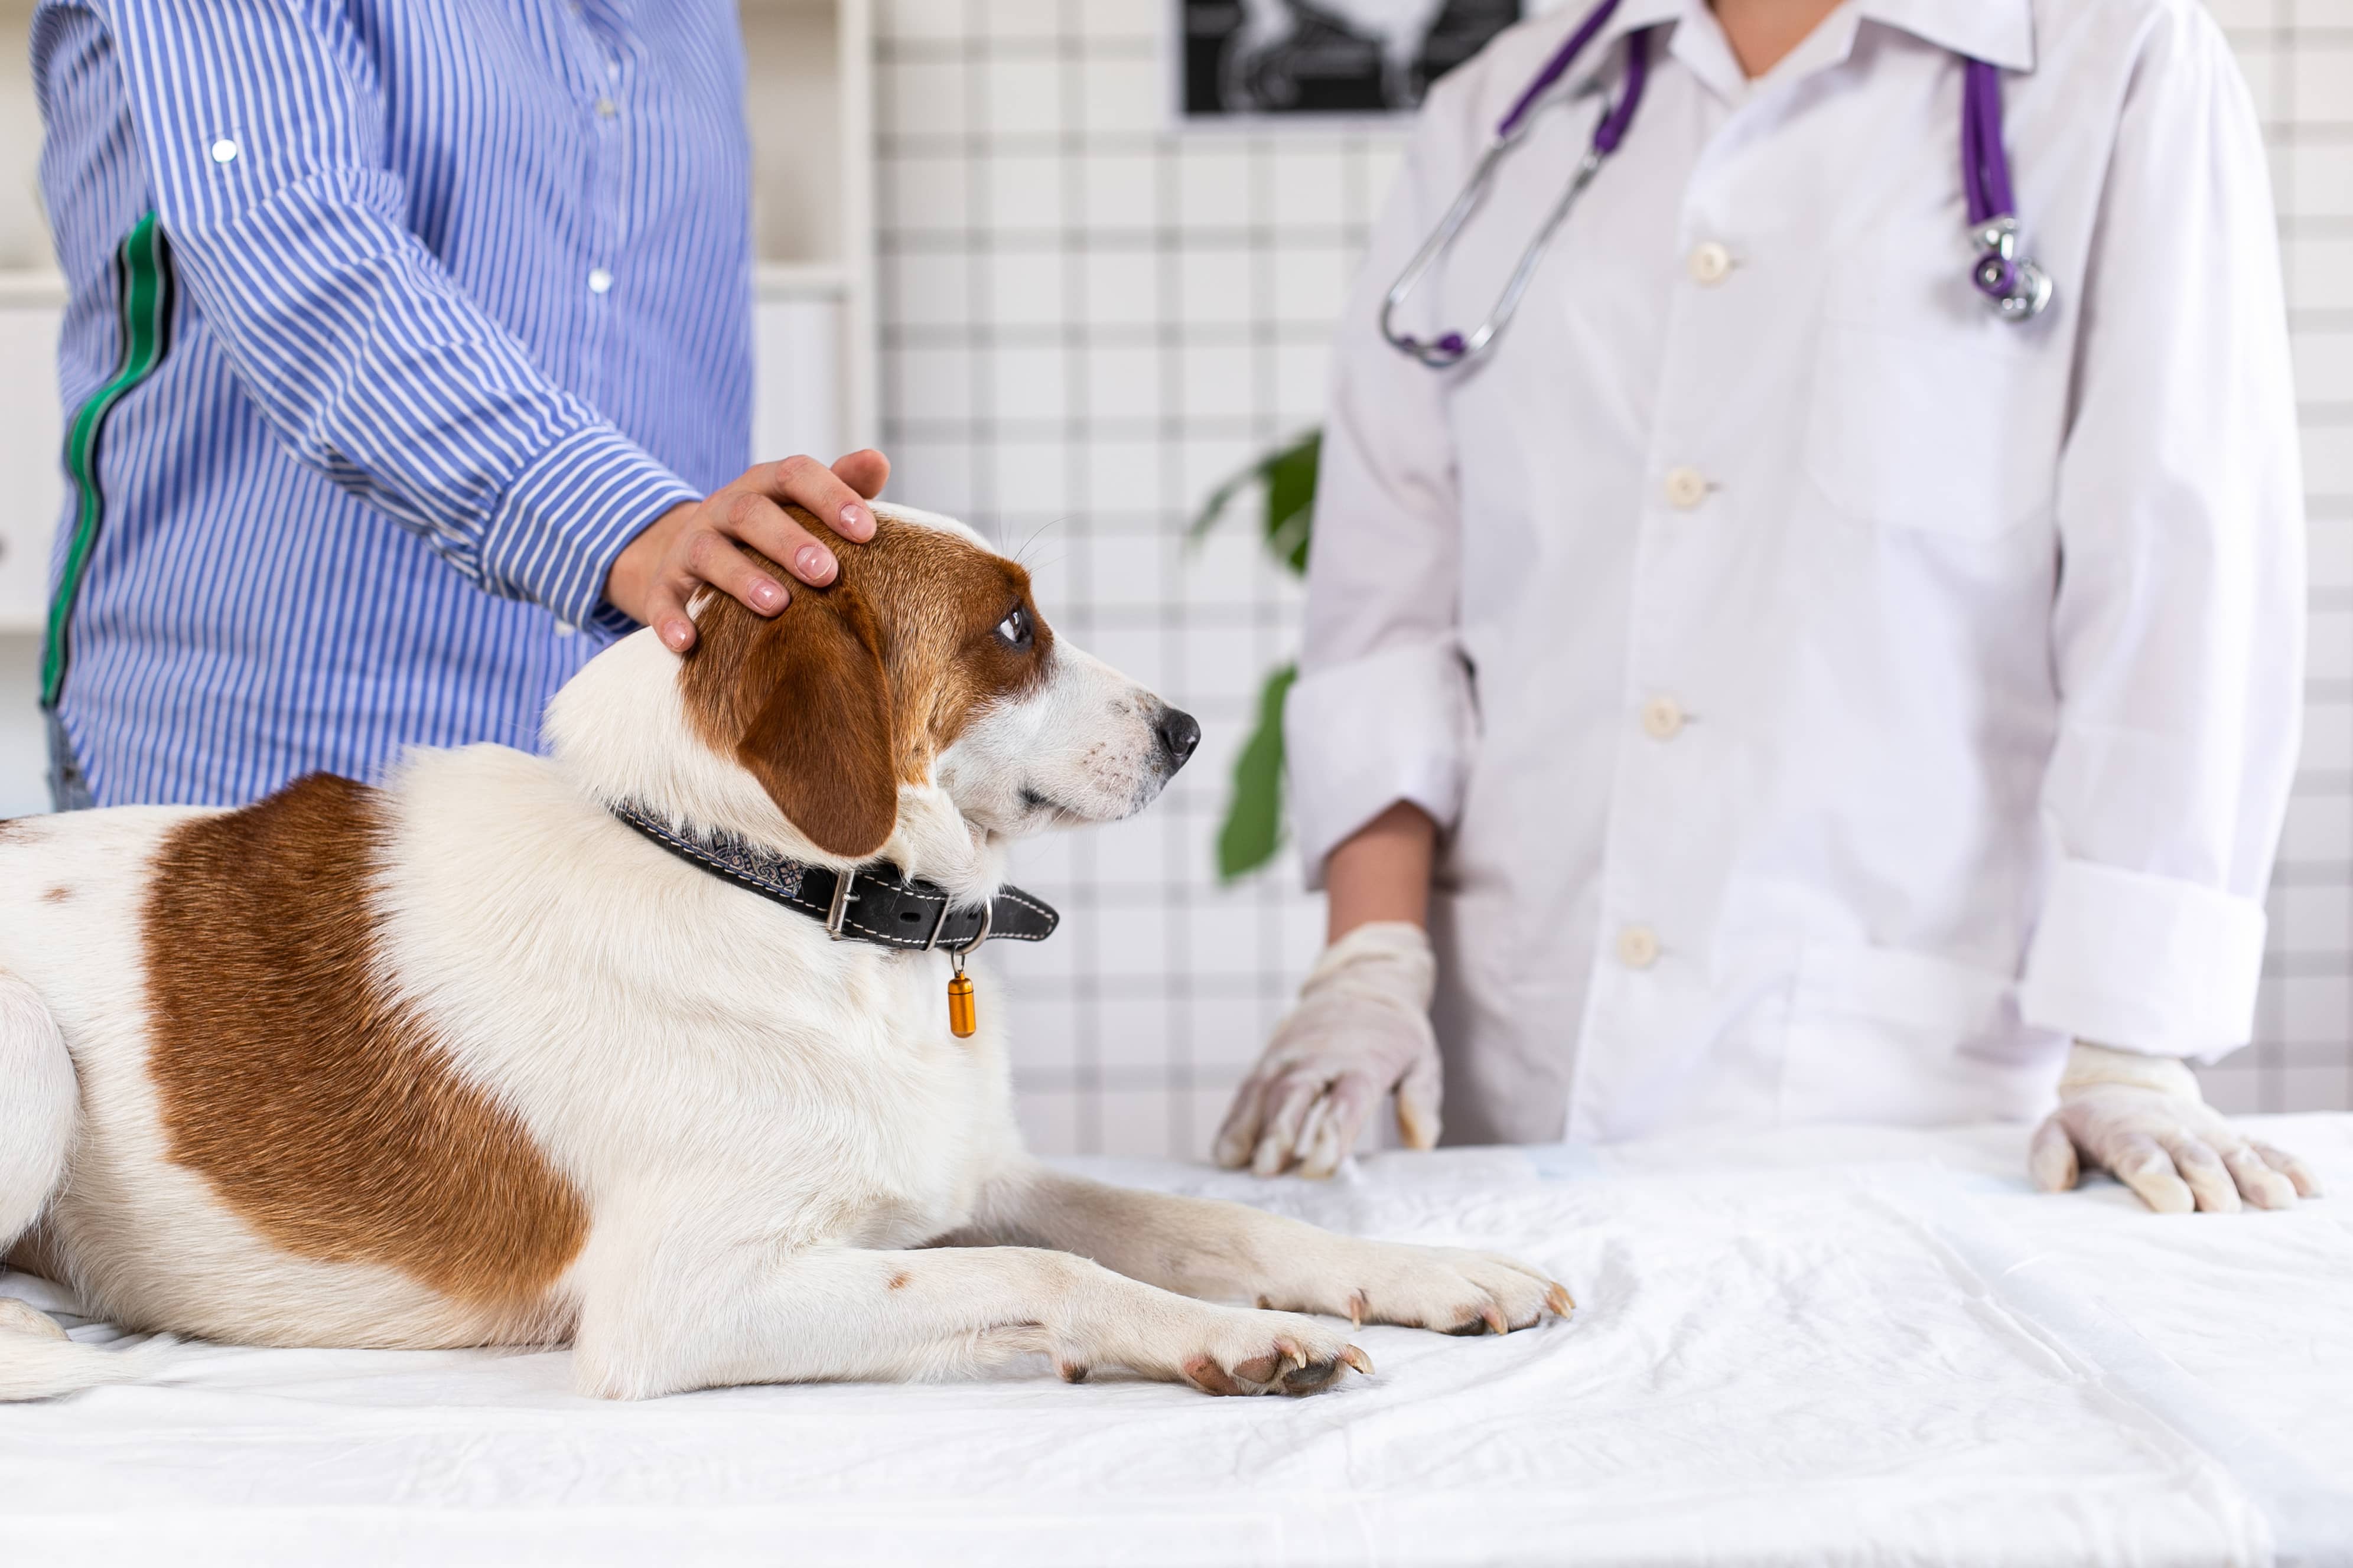 Dog on examination at the doctor in a veterinary clinic with owner